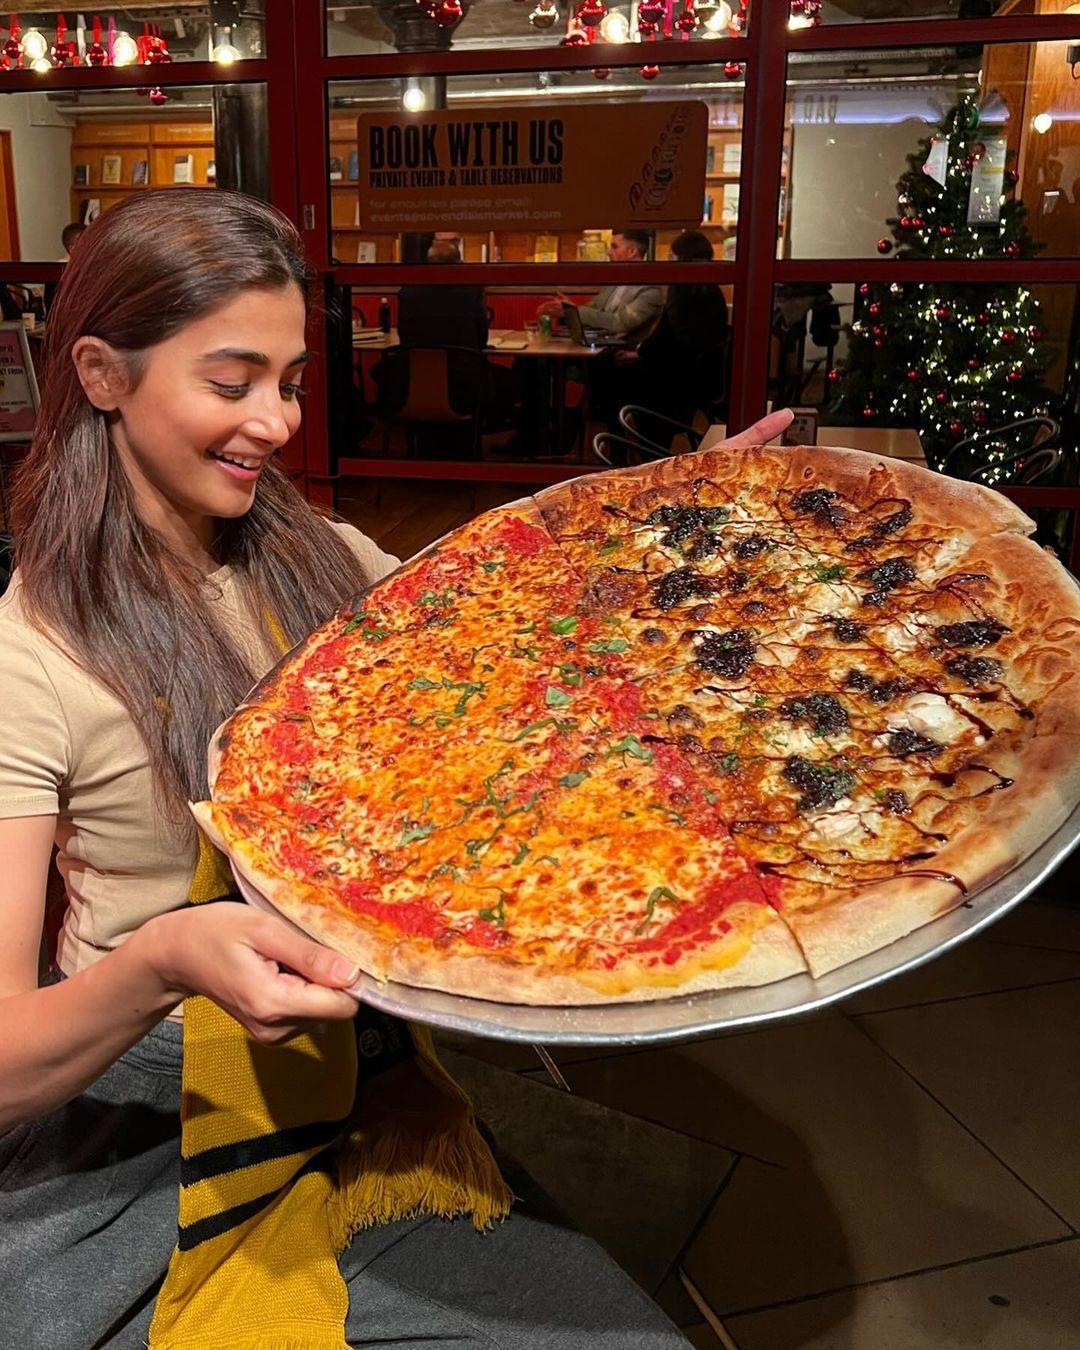 Pooja Hegde took Pizza Day to a whole other level! We feel just like Pooja looking at that whole pie!